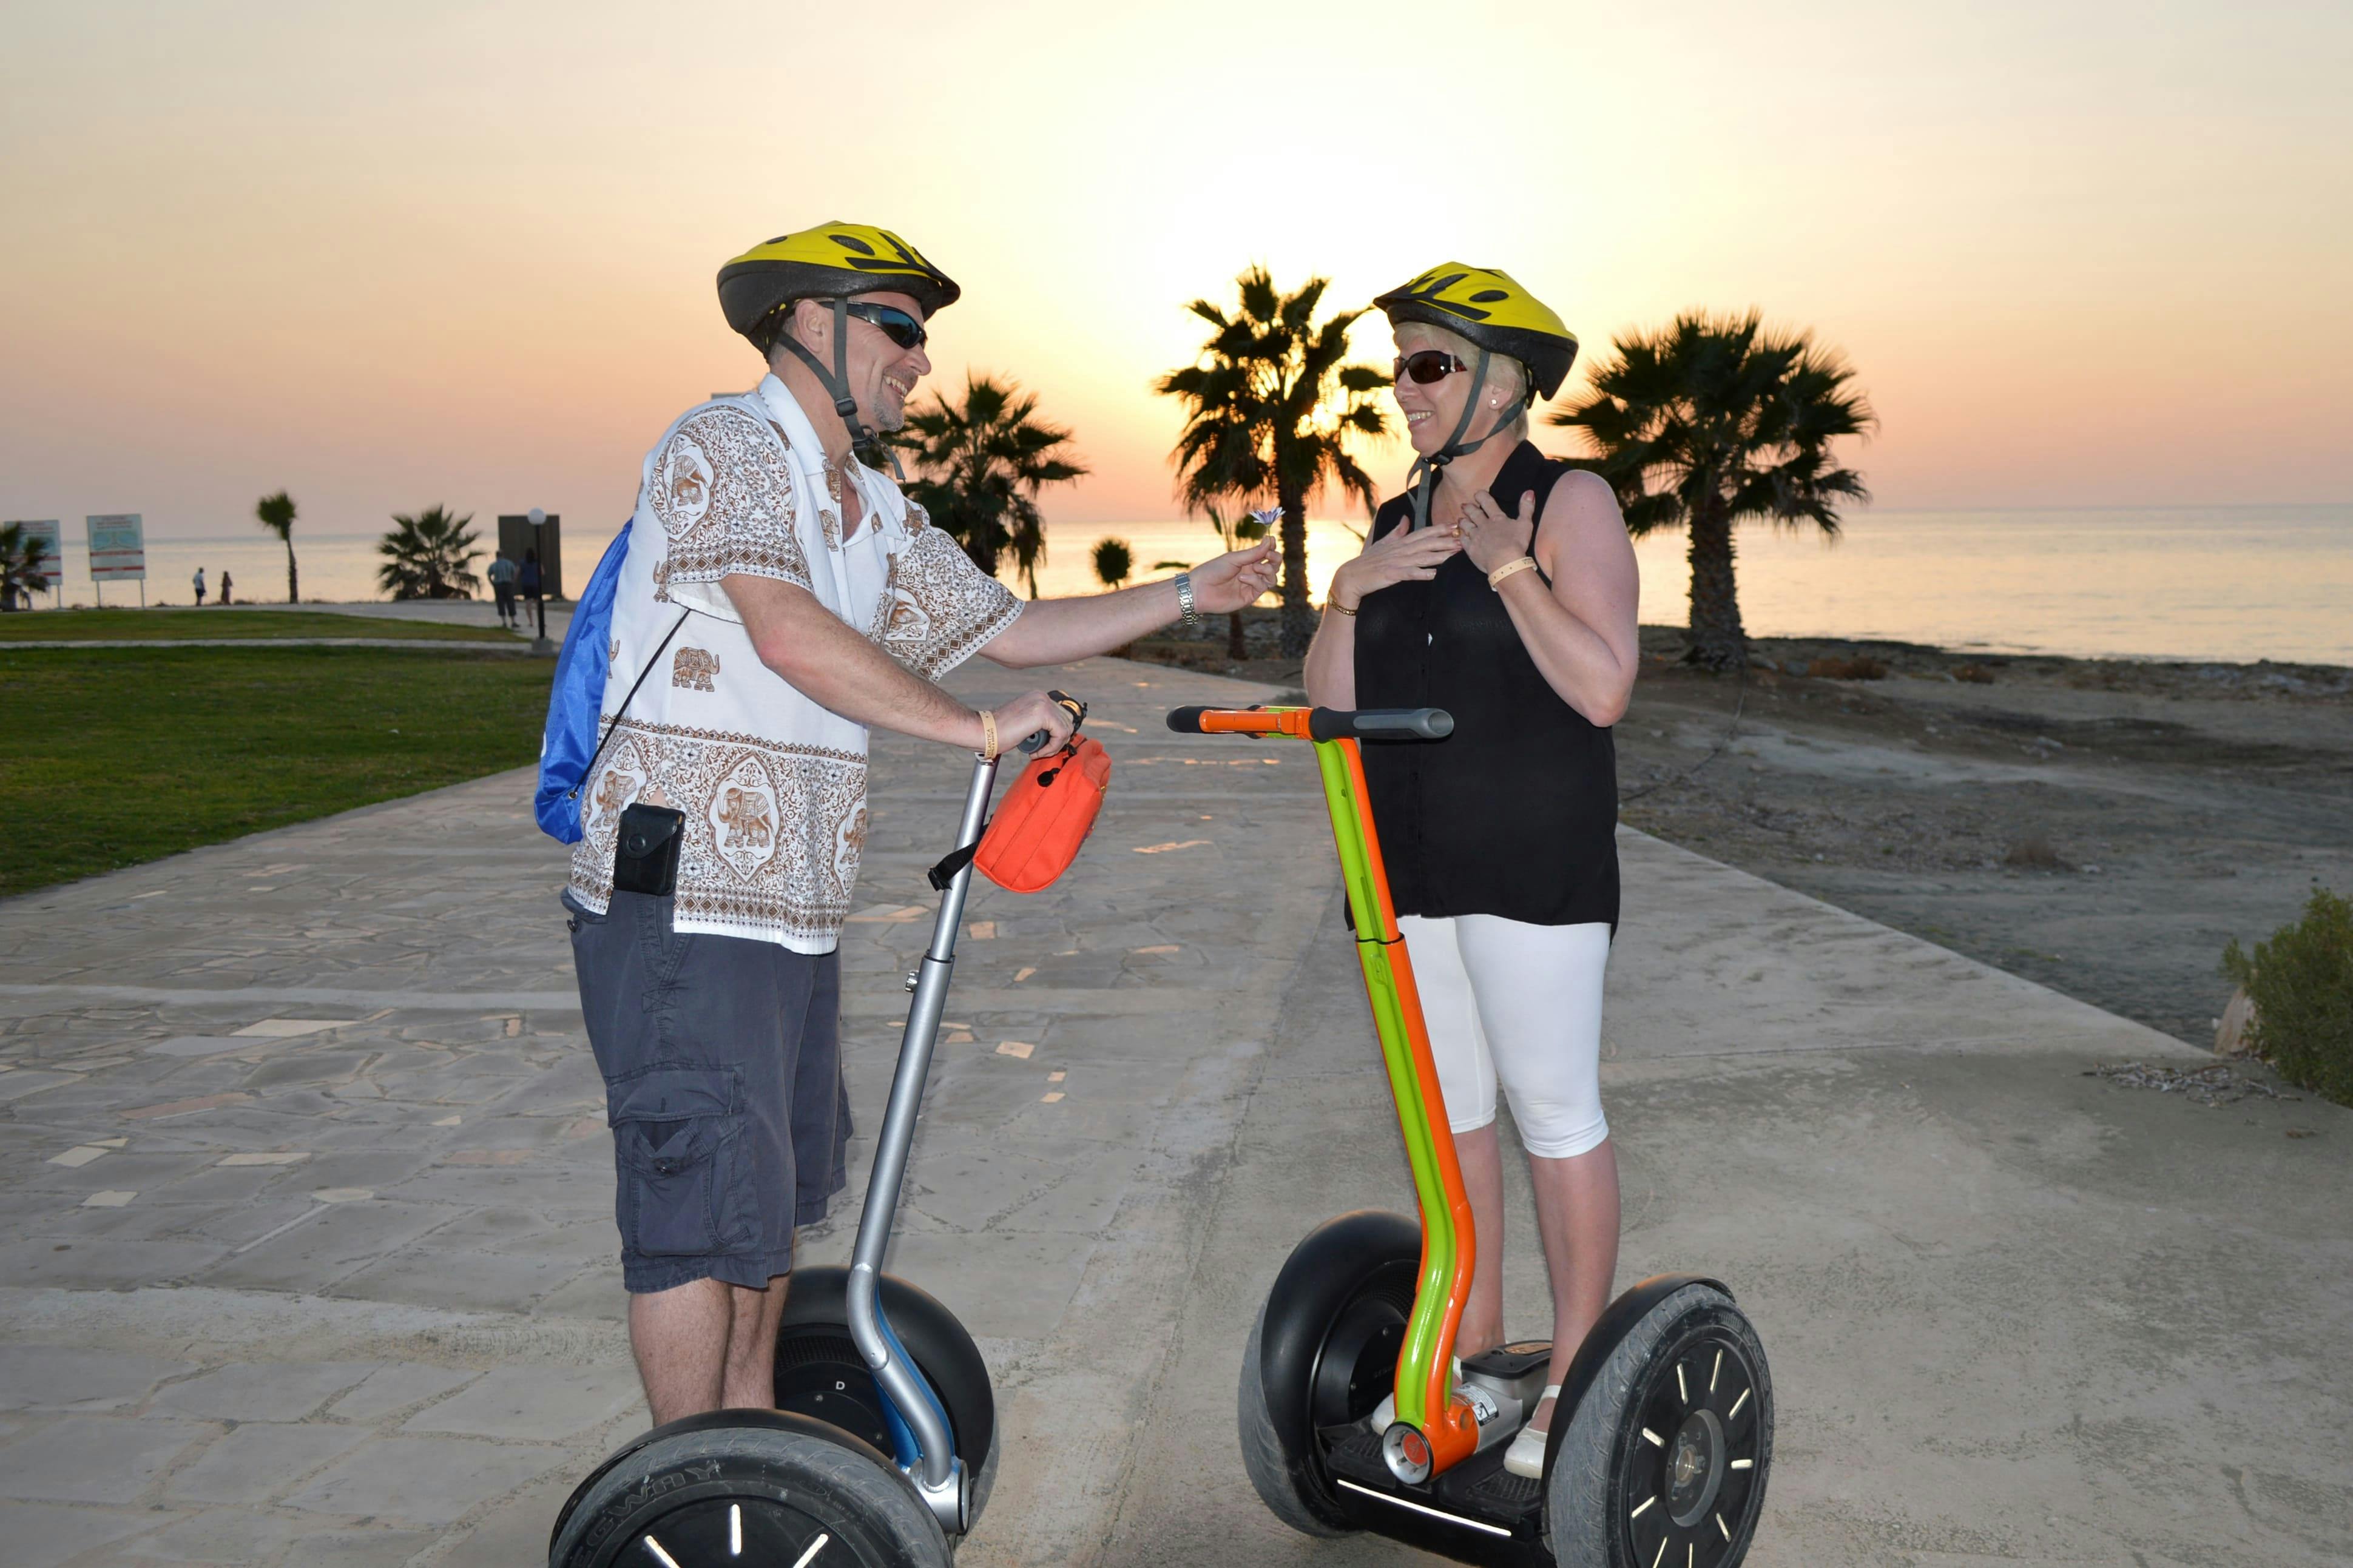 Paphos Electric Scooter Small Group Tour Ticket